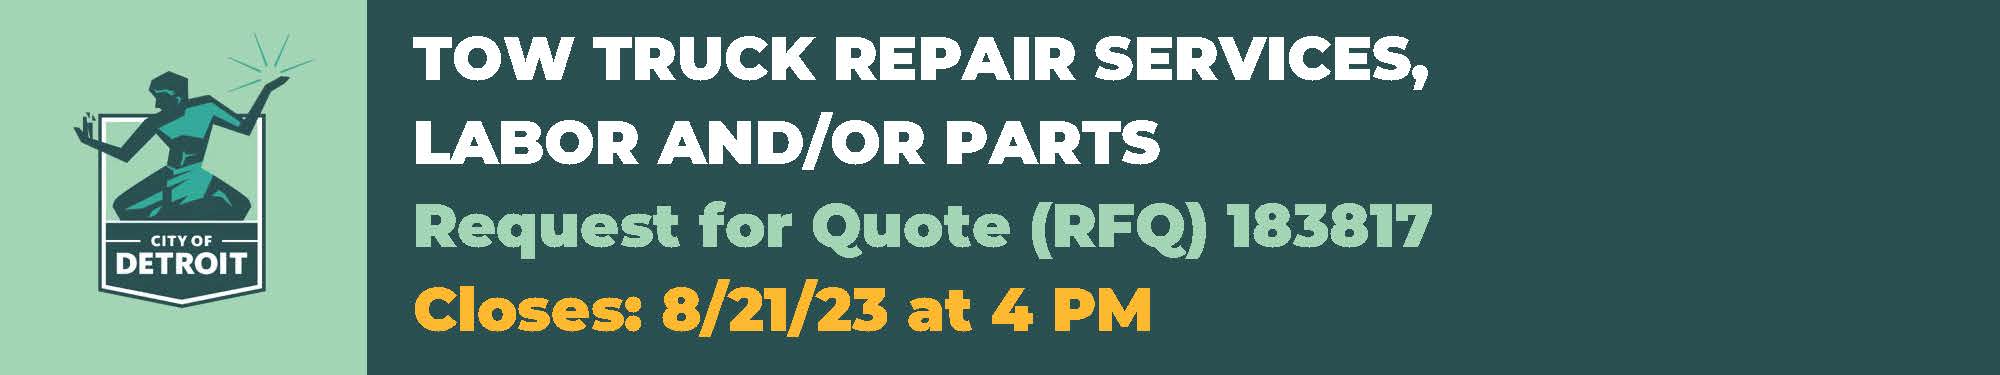 Take Part: TOW TRUCK REPAIR SERVICES, LABOR AND/OR PARTS